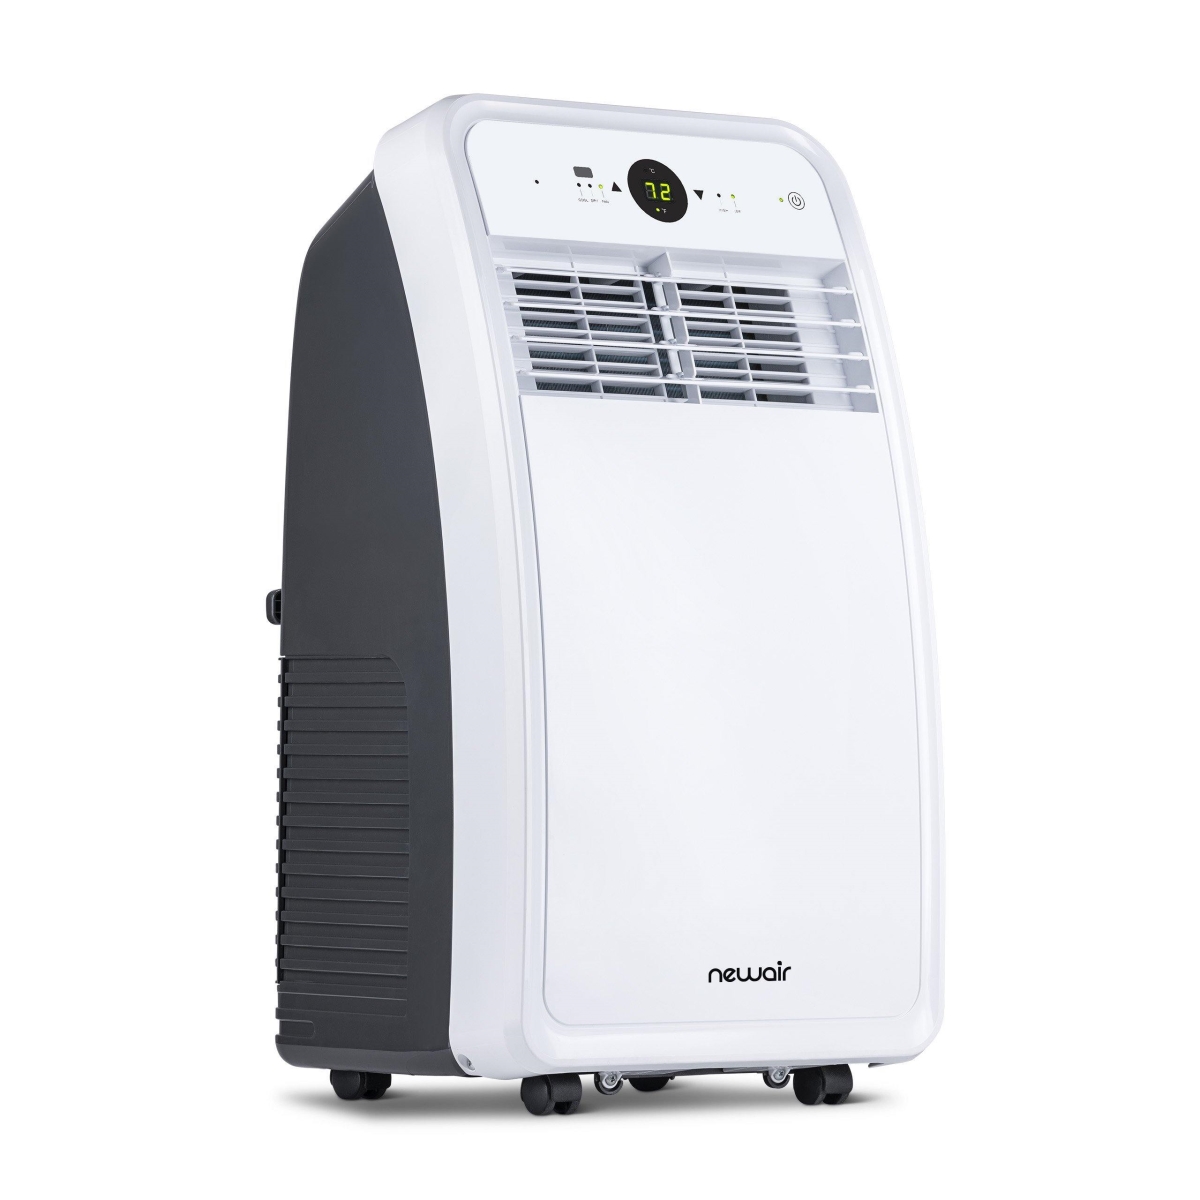 Newaire Newair NAC08KWH00 200 sq. ft. Cools Compact Portable Air Conditioner - Easy Setup Window Venting Kit & Remote Control - 8000 to